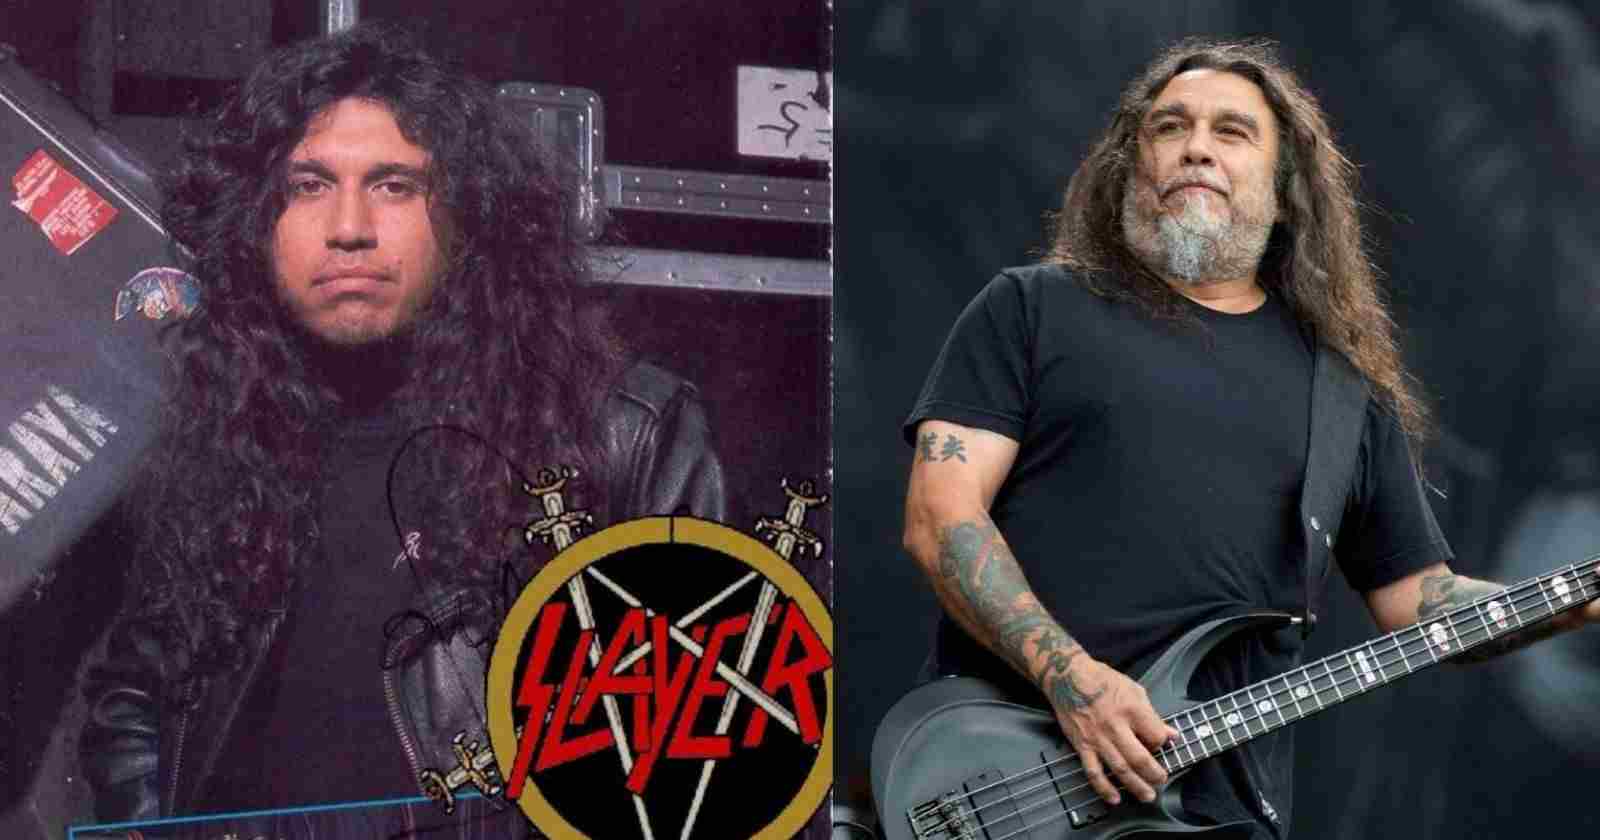 Tom Araya now and then